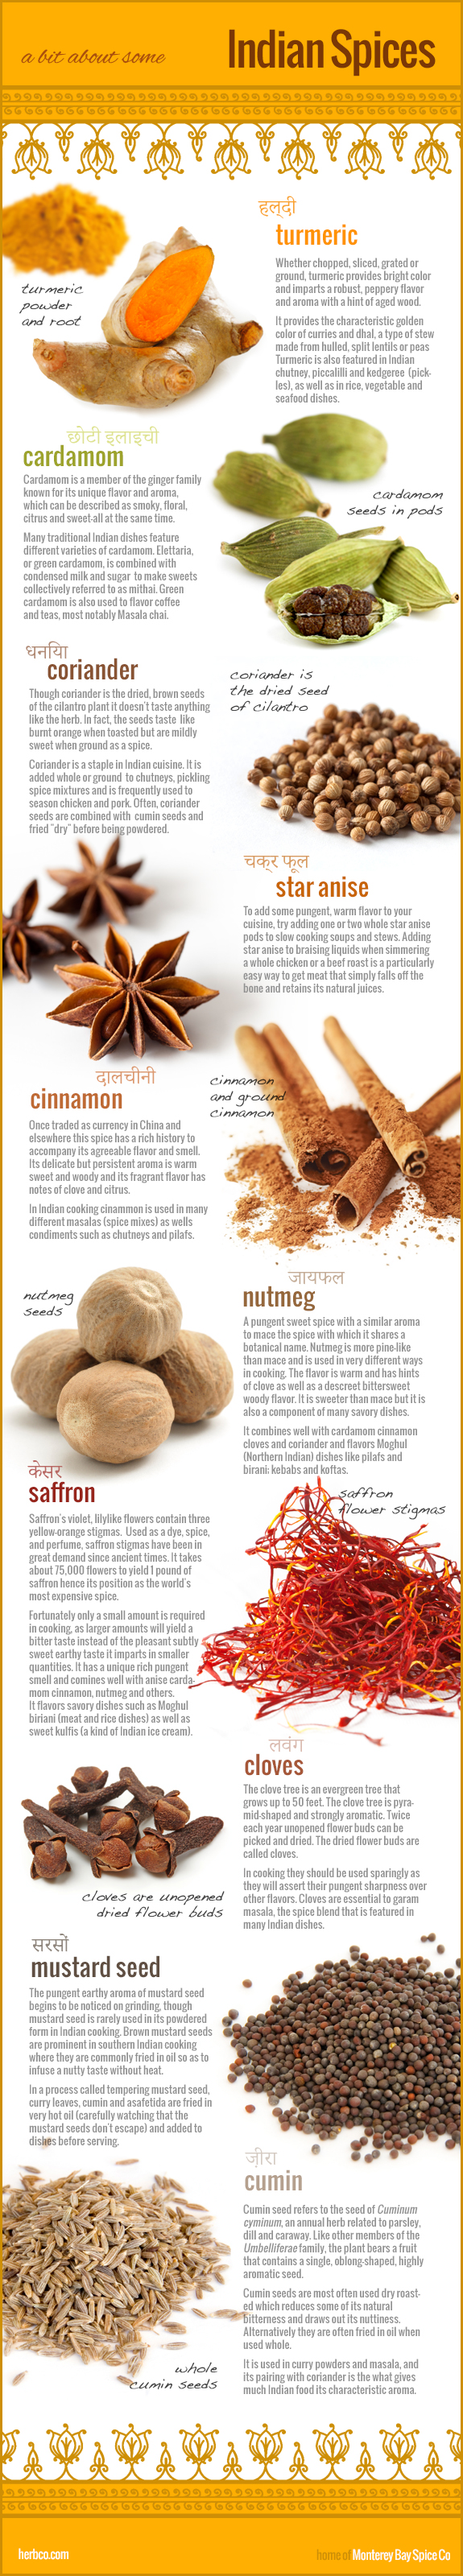 Indian spices infographic